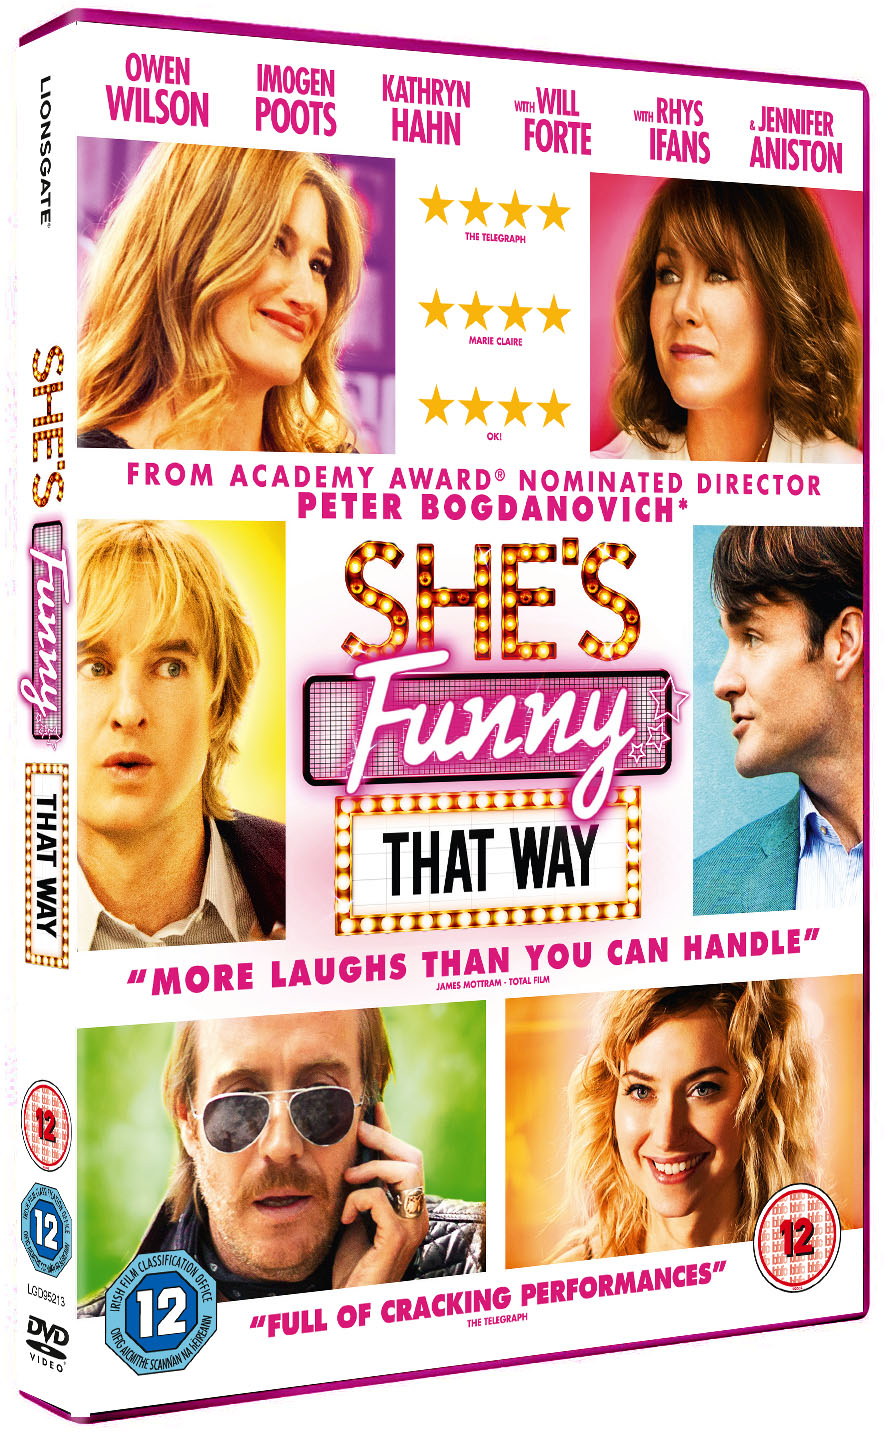 Trailer-She’s funny that way